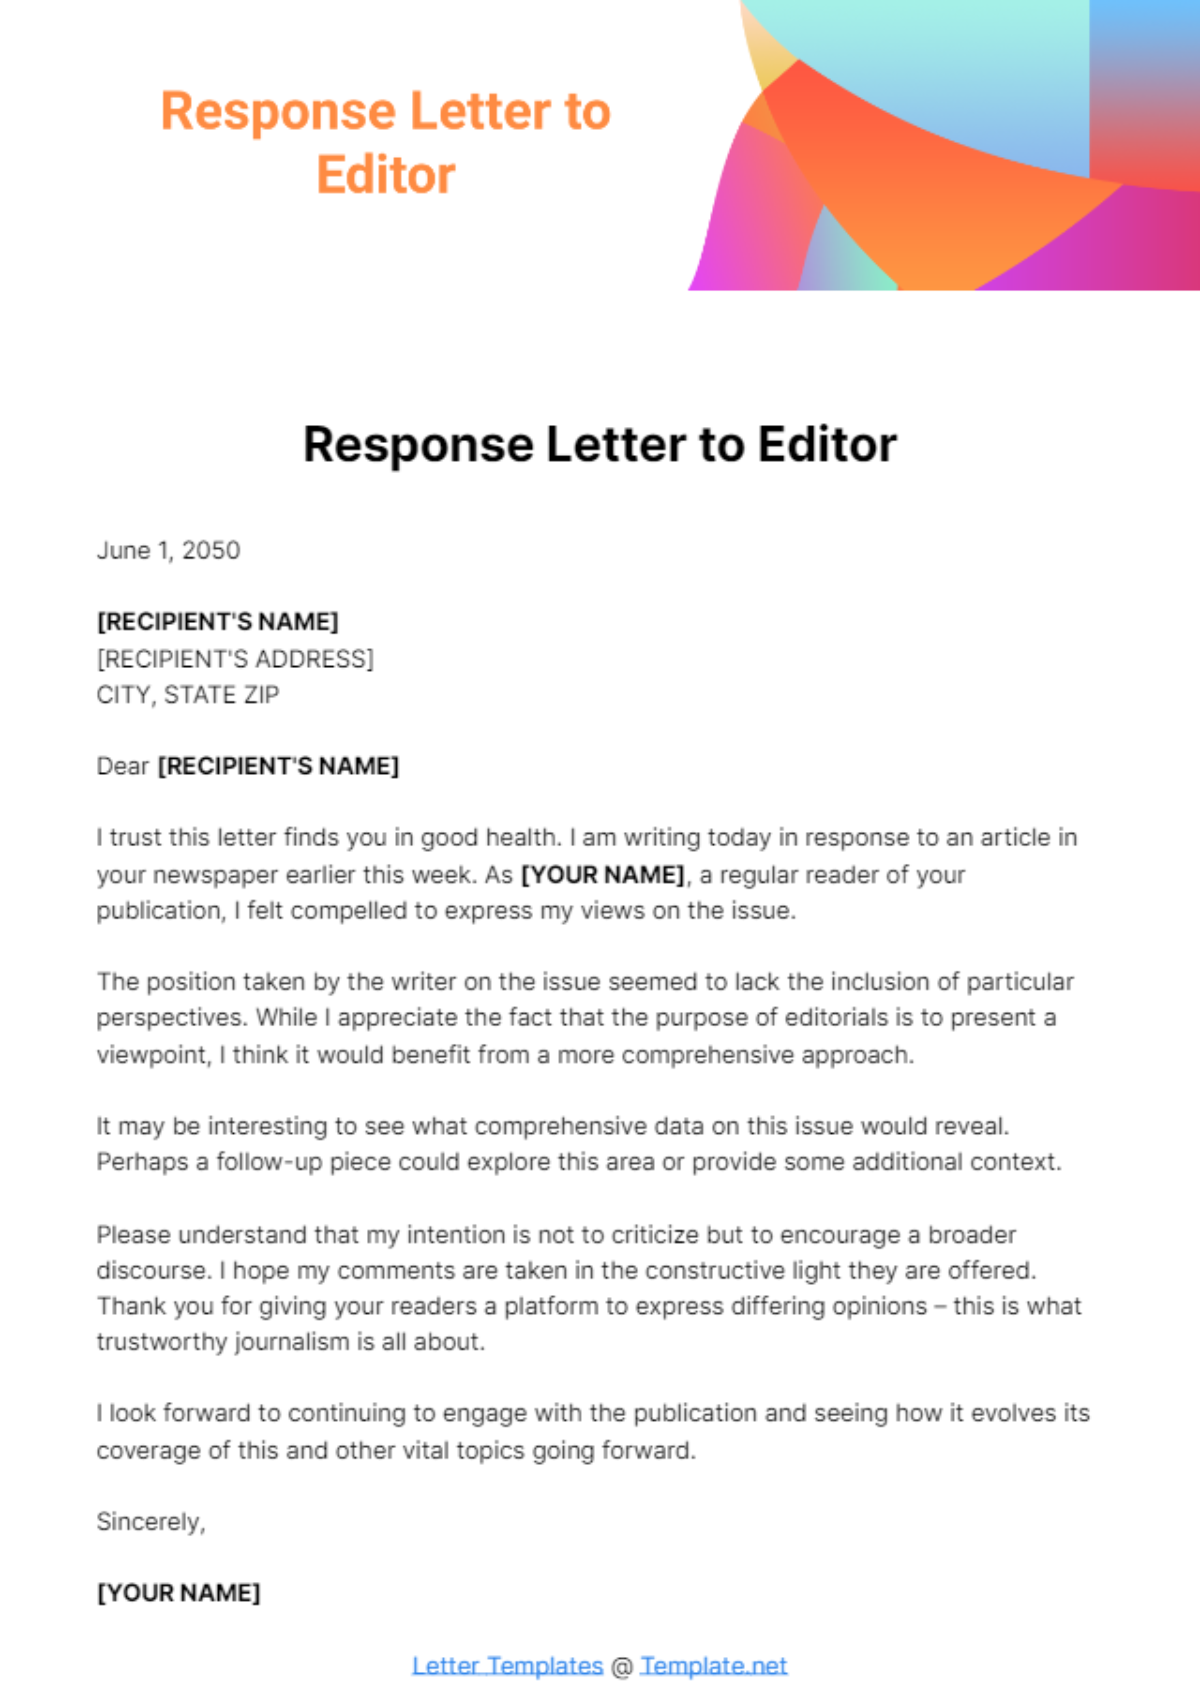 Response Letter to Editor Template